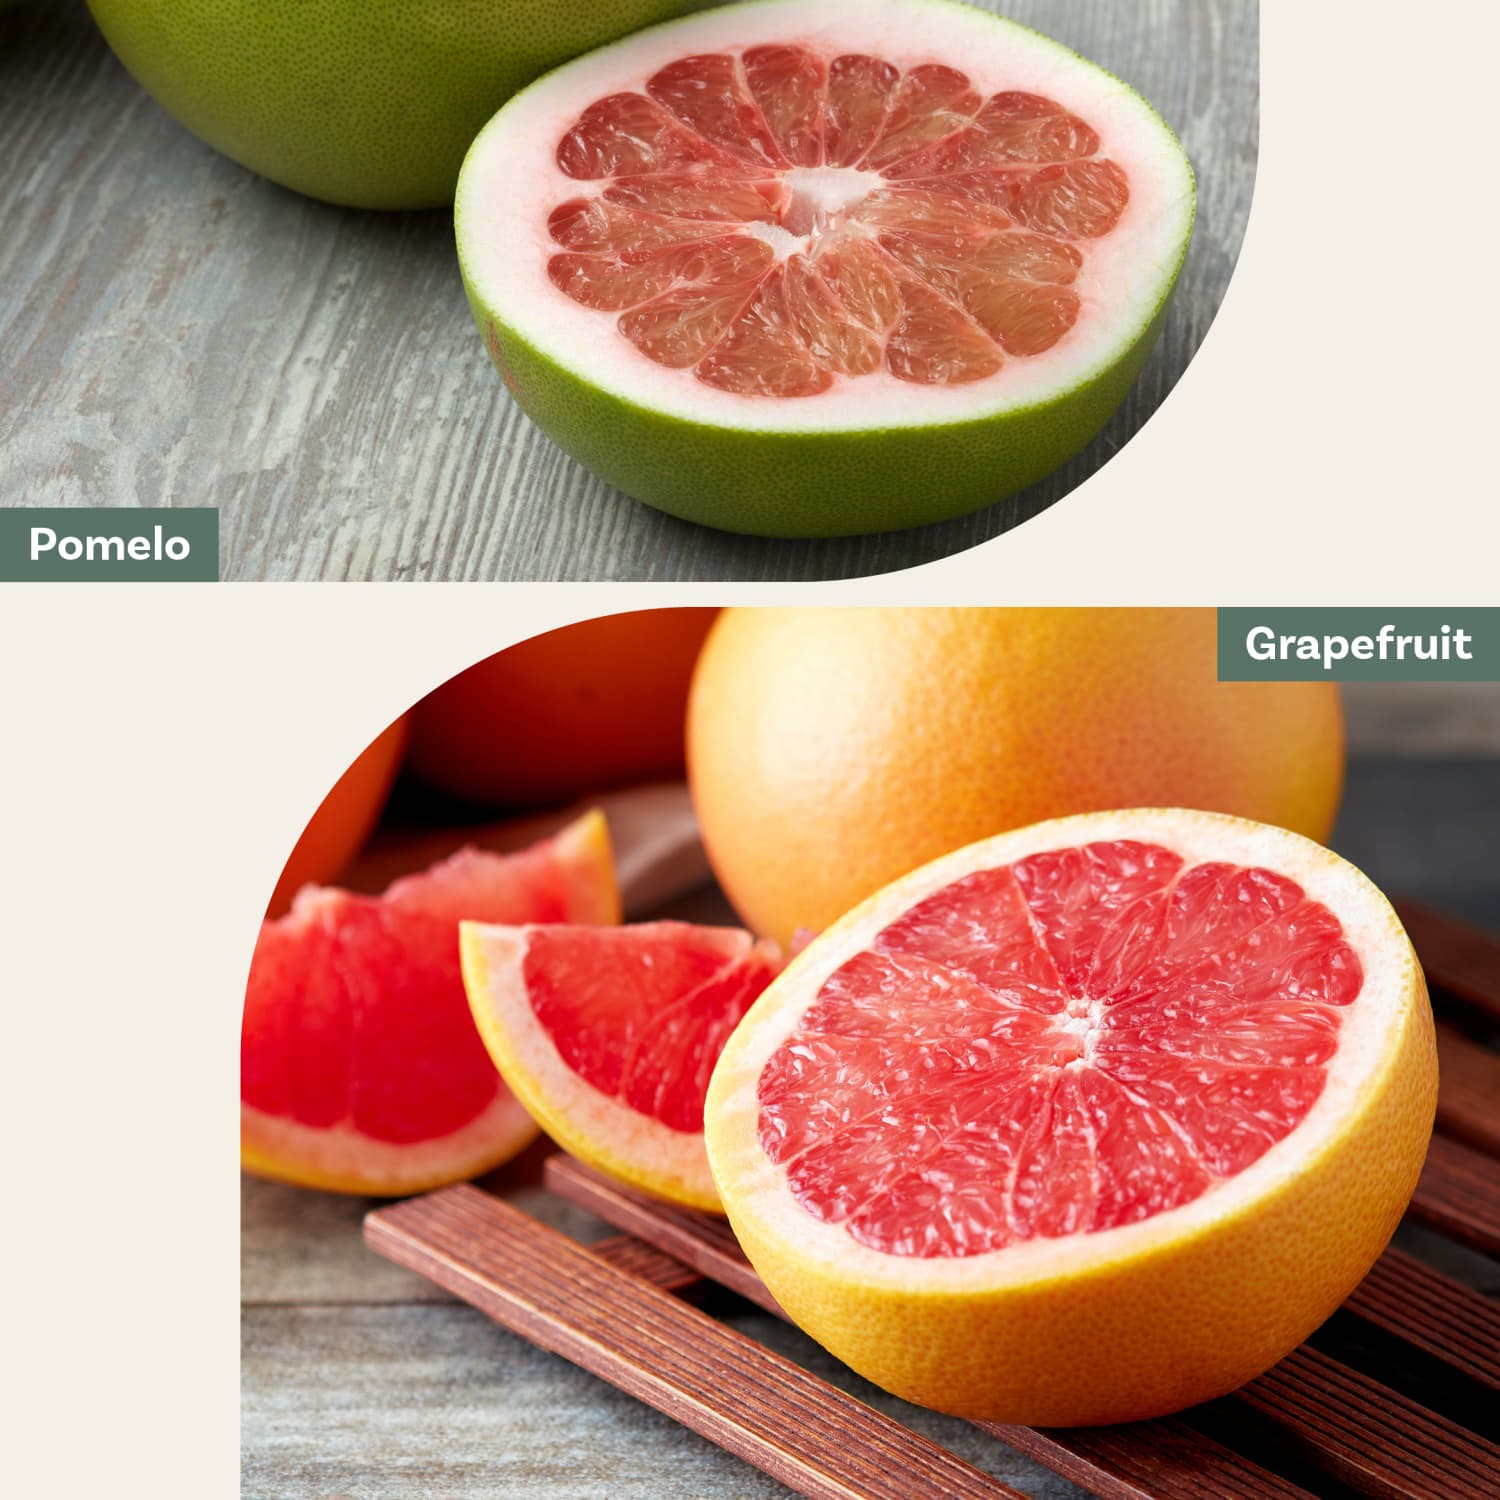 Pomelo vs. Grapefruit: What's the Difference Between the Two? | The Kitchn